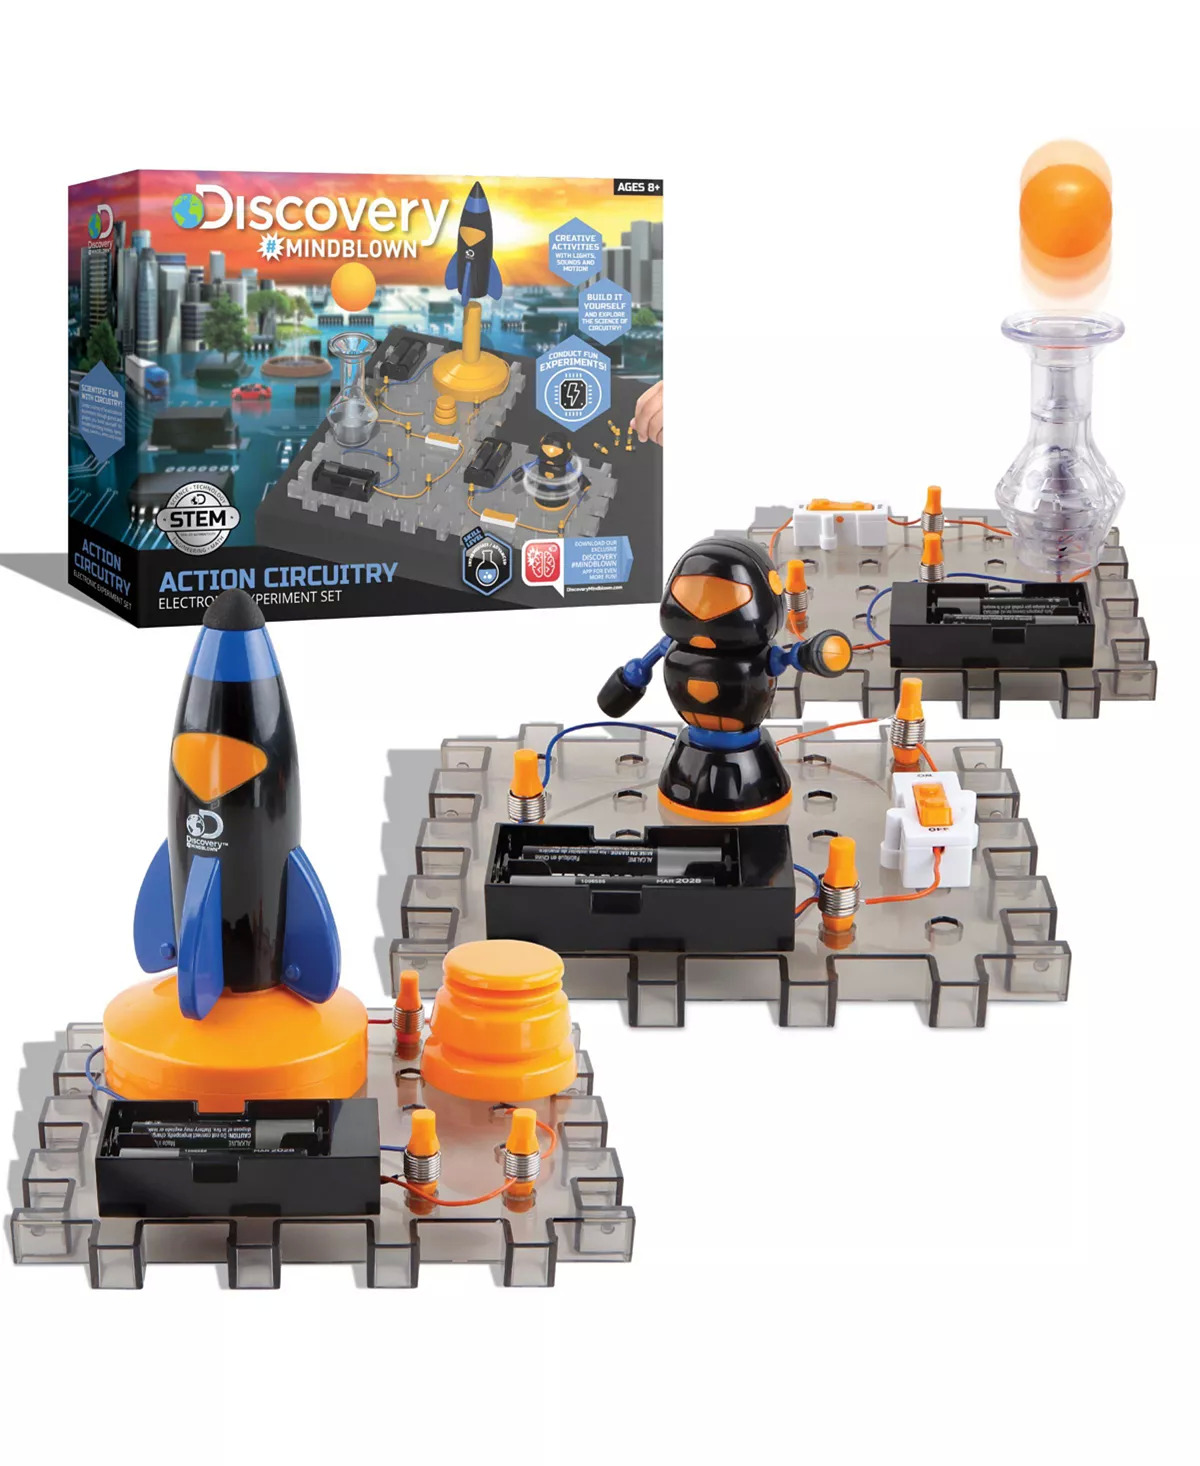 Discovery Mindblown Kids' Toys: Toy Circuitry Action Experiment Set $13, Telescope w/ Tripod $50 + Free Store Pickup at Macys or FS on $25+